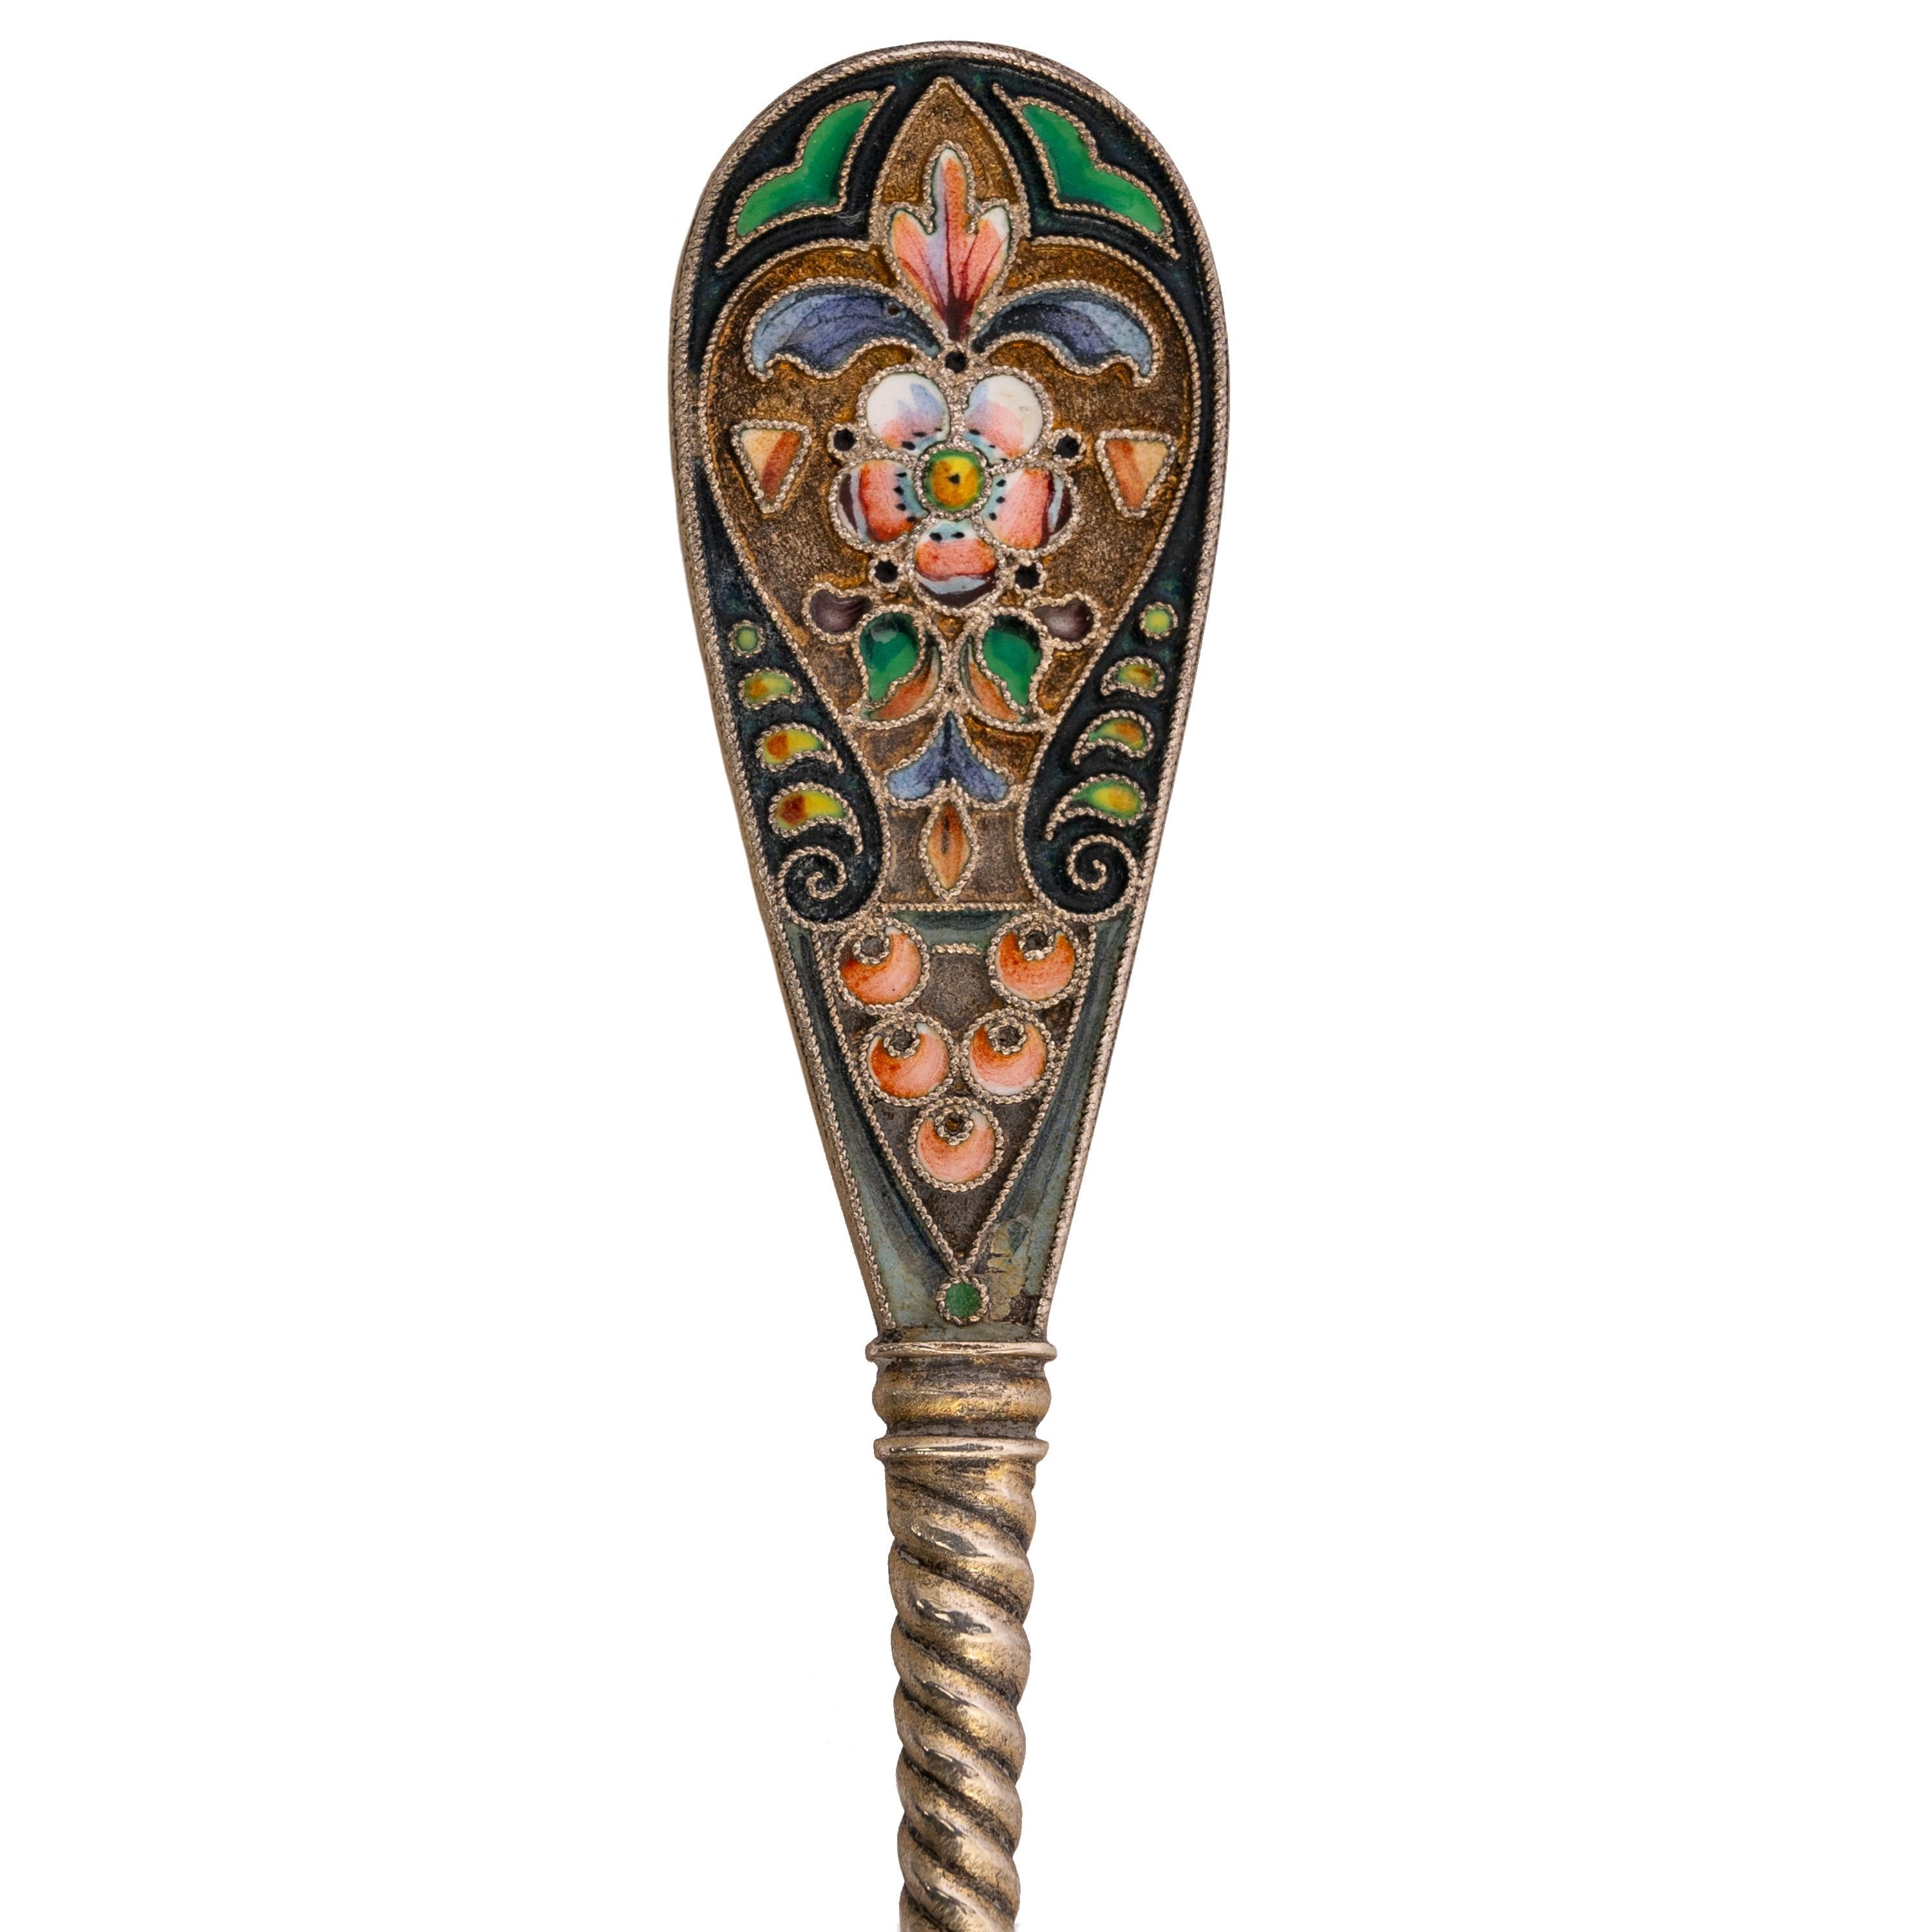 Antique Imperial Russian Sliver Gilt Cloisonné Enamel Tea Strainer Moscow, 1908 In Good Condition For Sale In Portland, OR